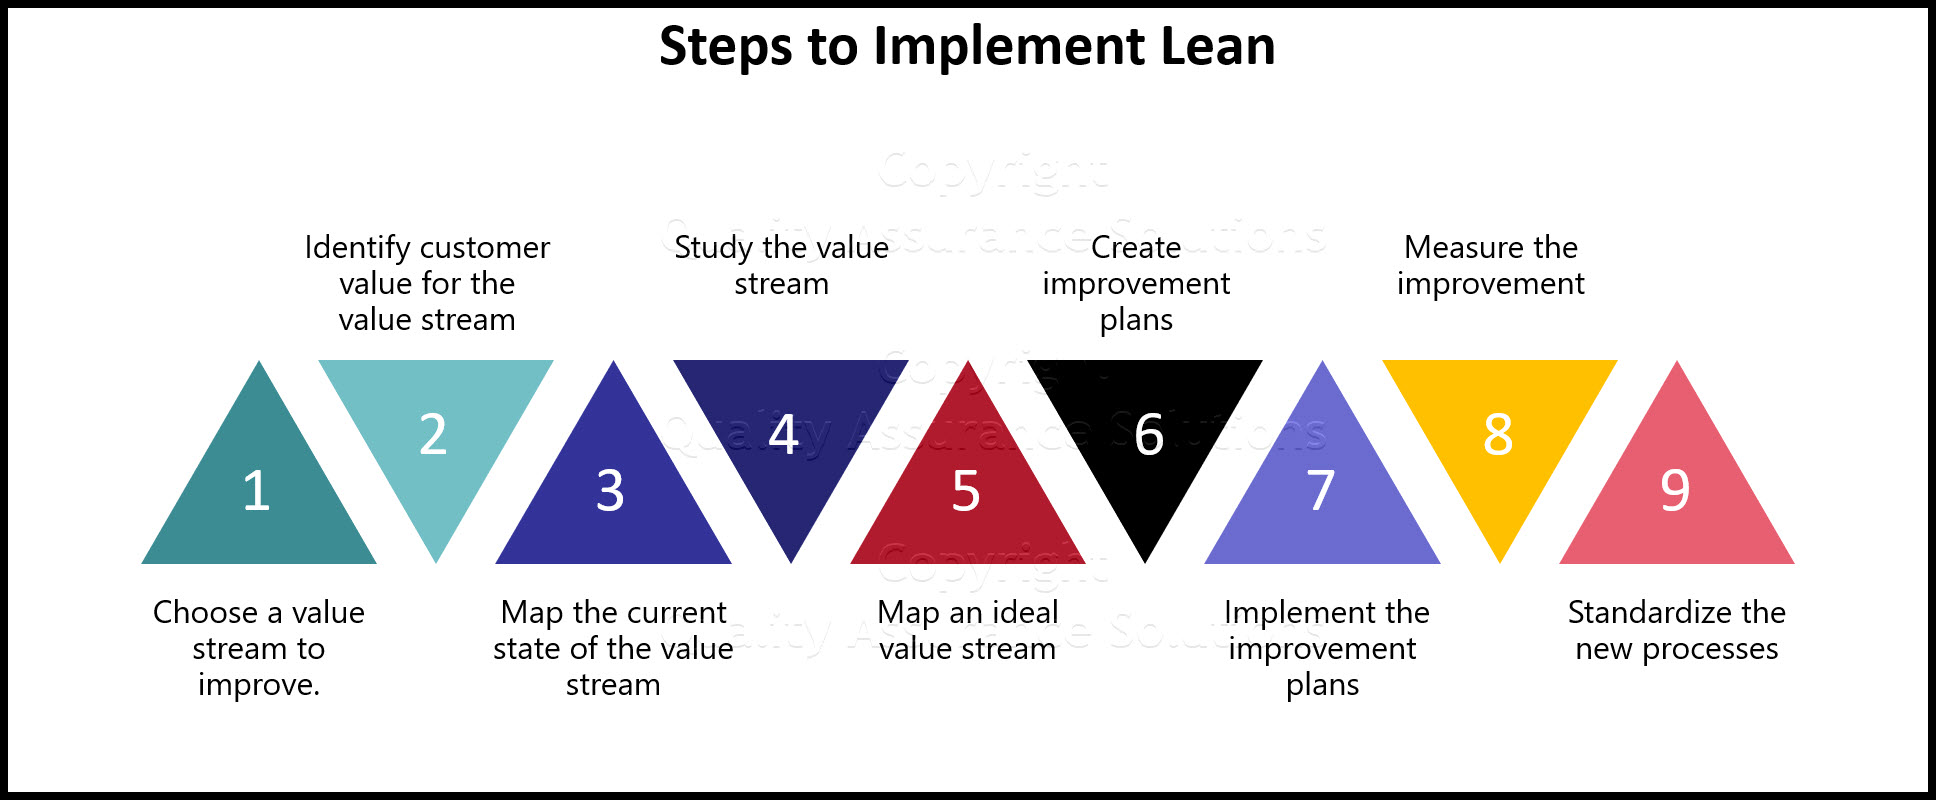 Become a friend with lean thinking. Learn the steps to implement the lean process.